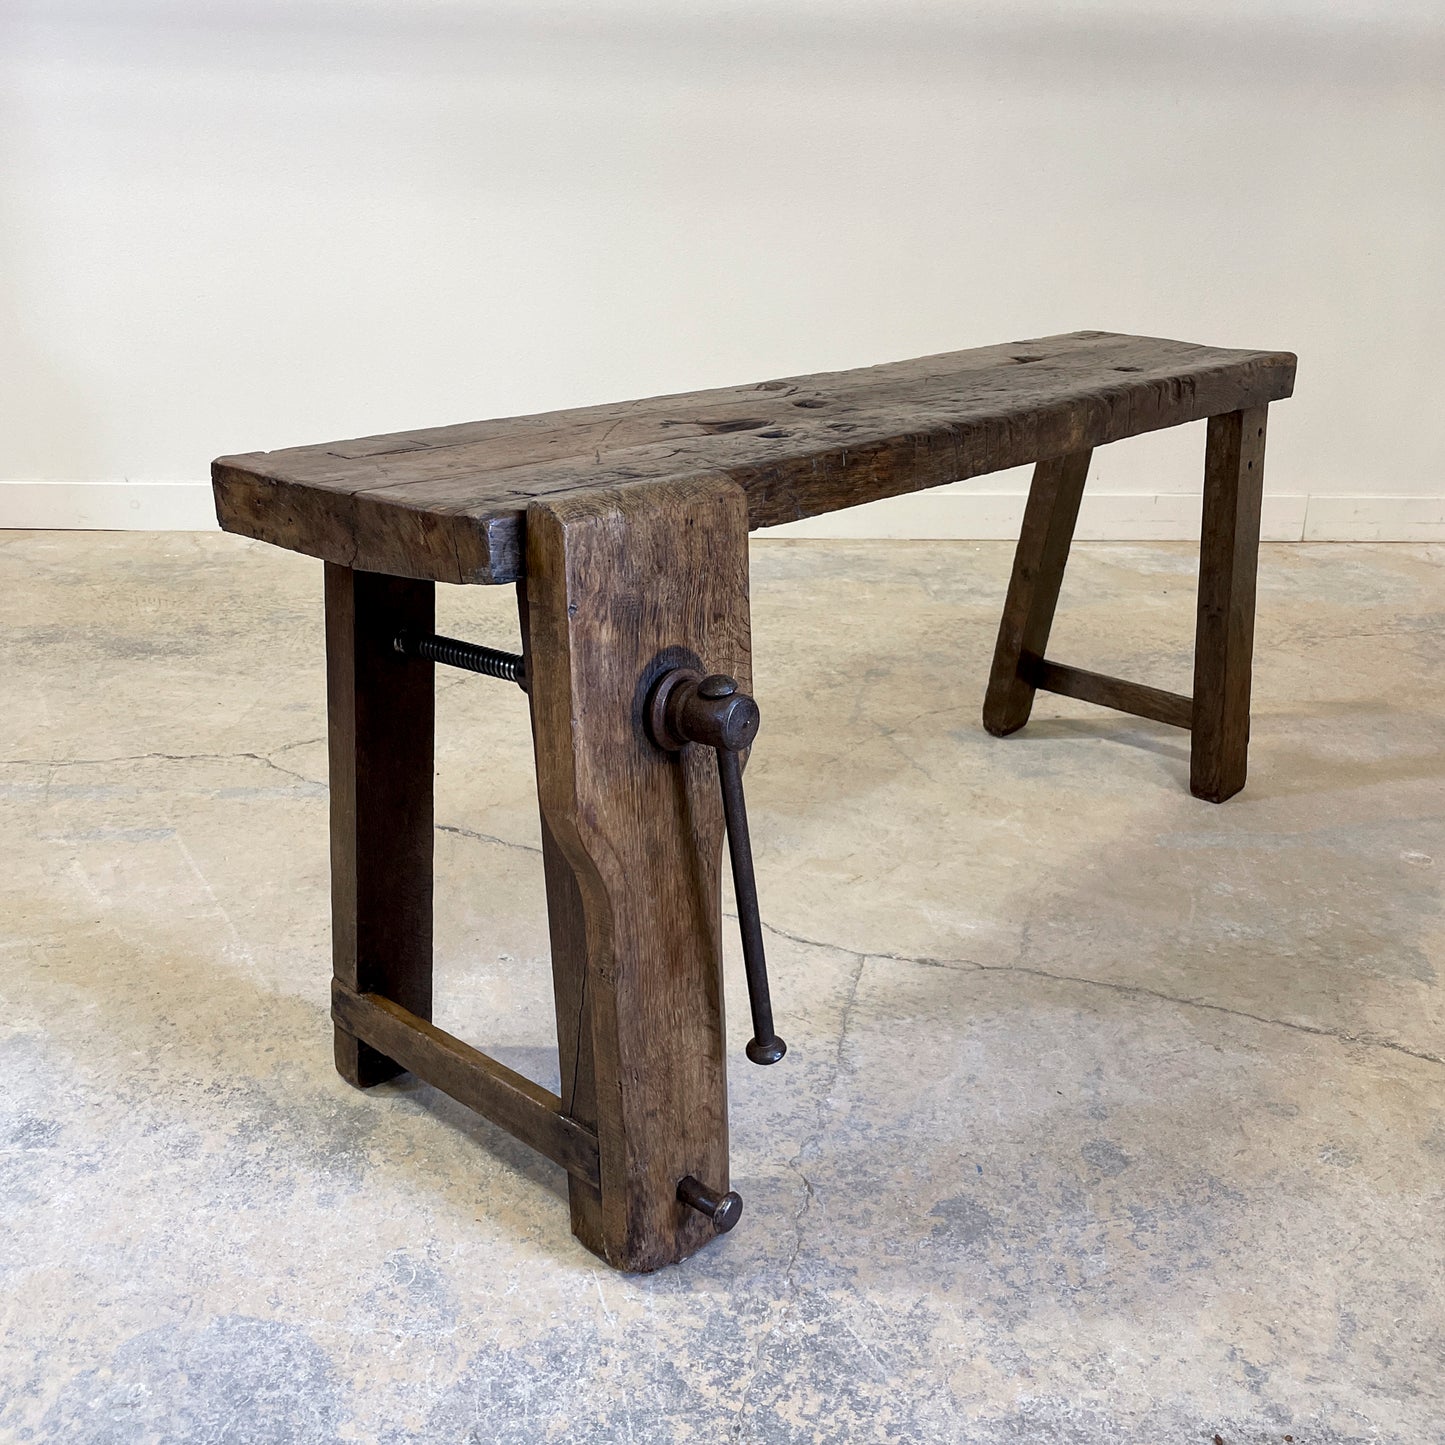 Wood Workers Bench